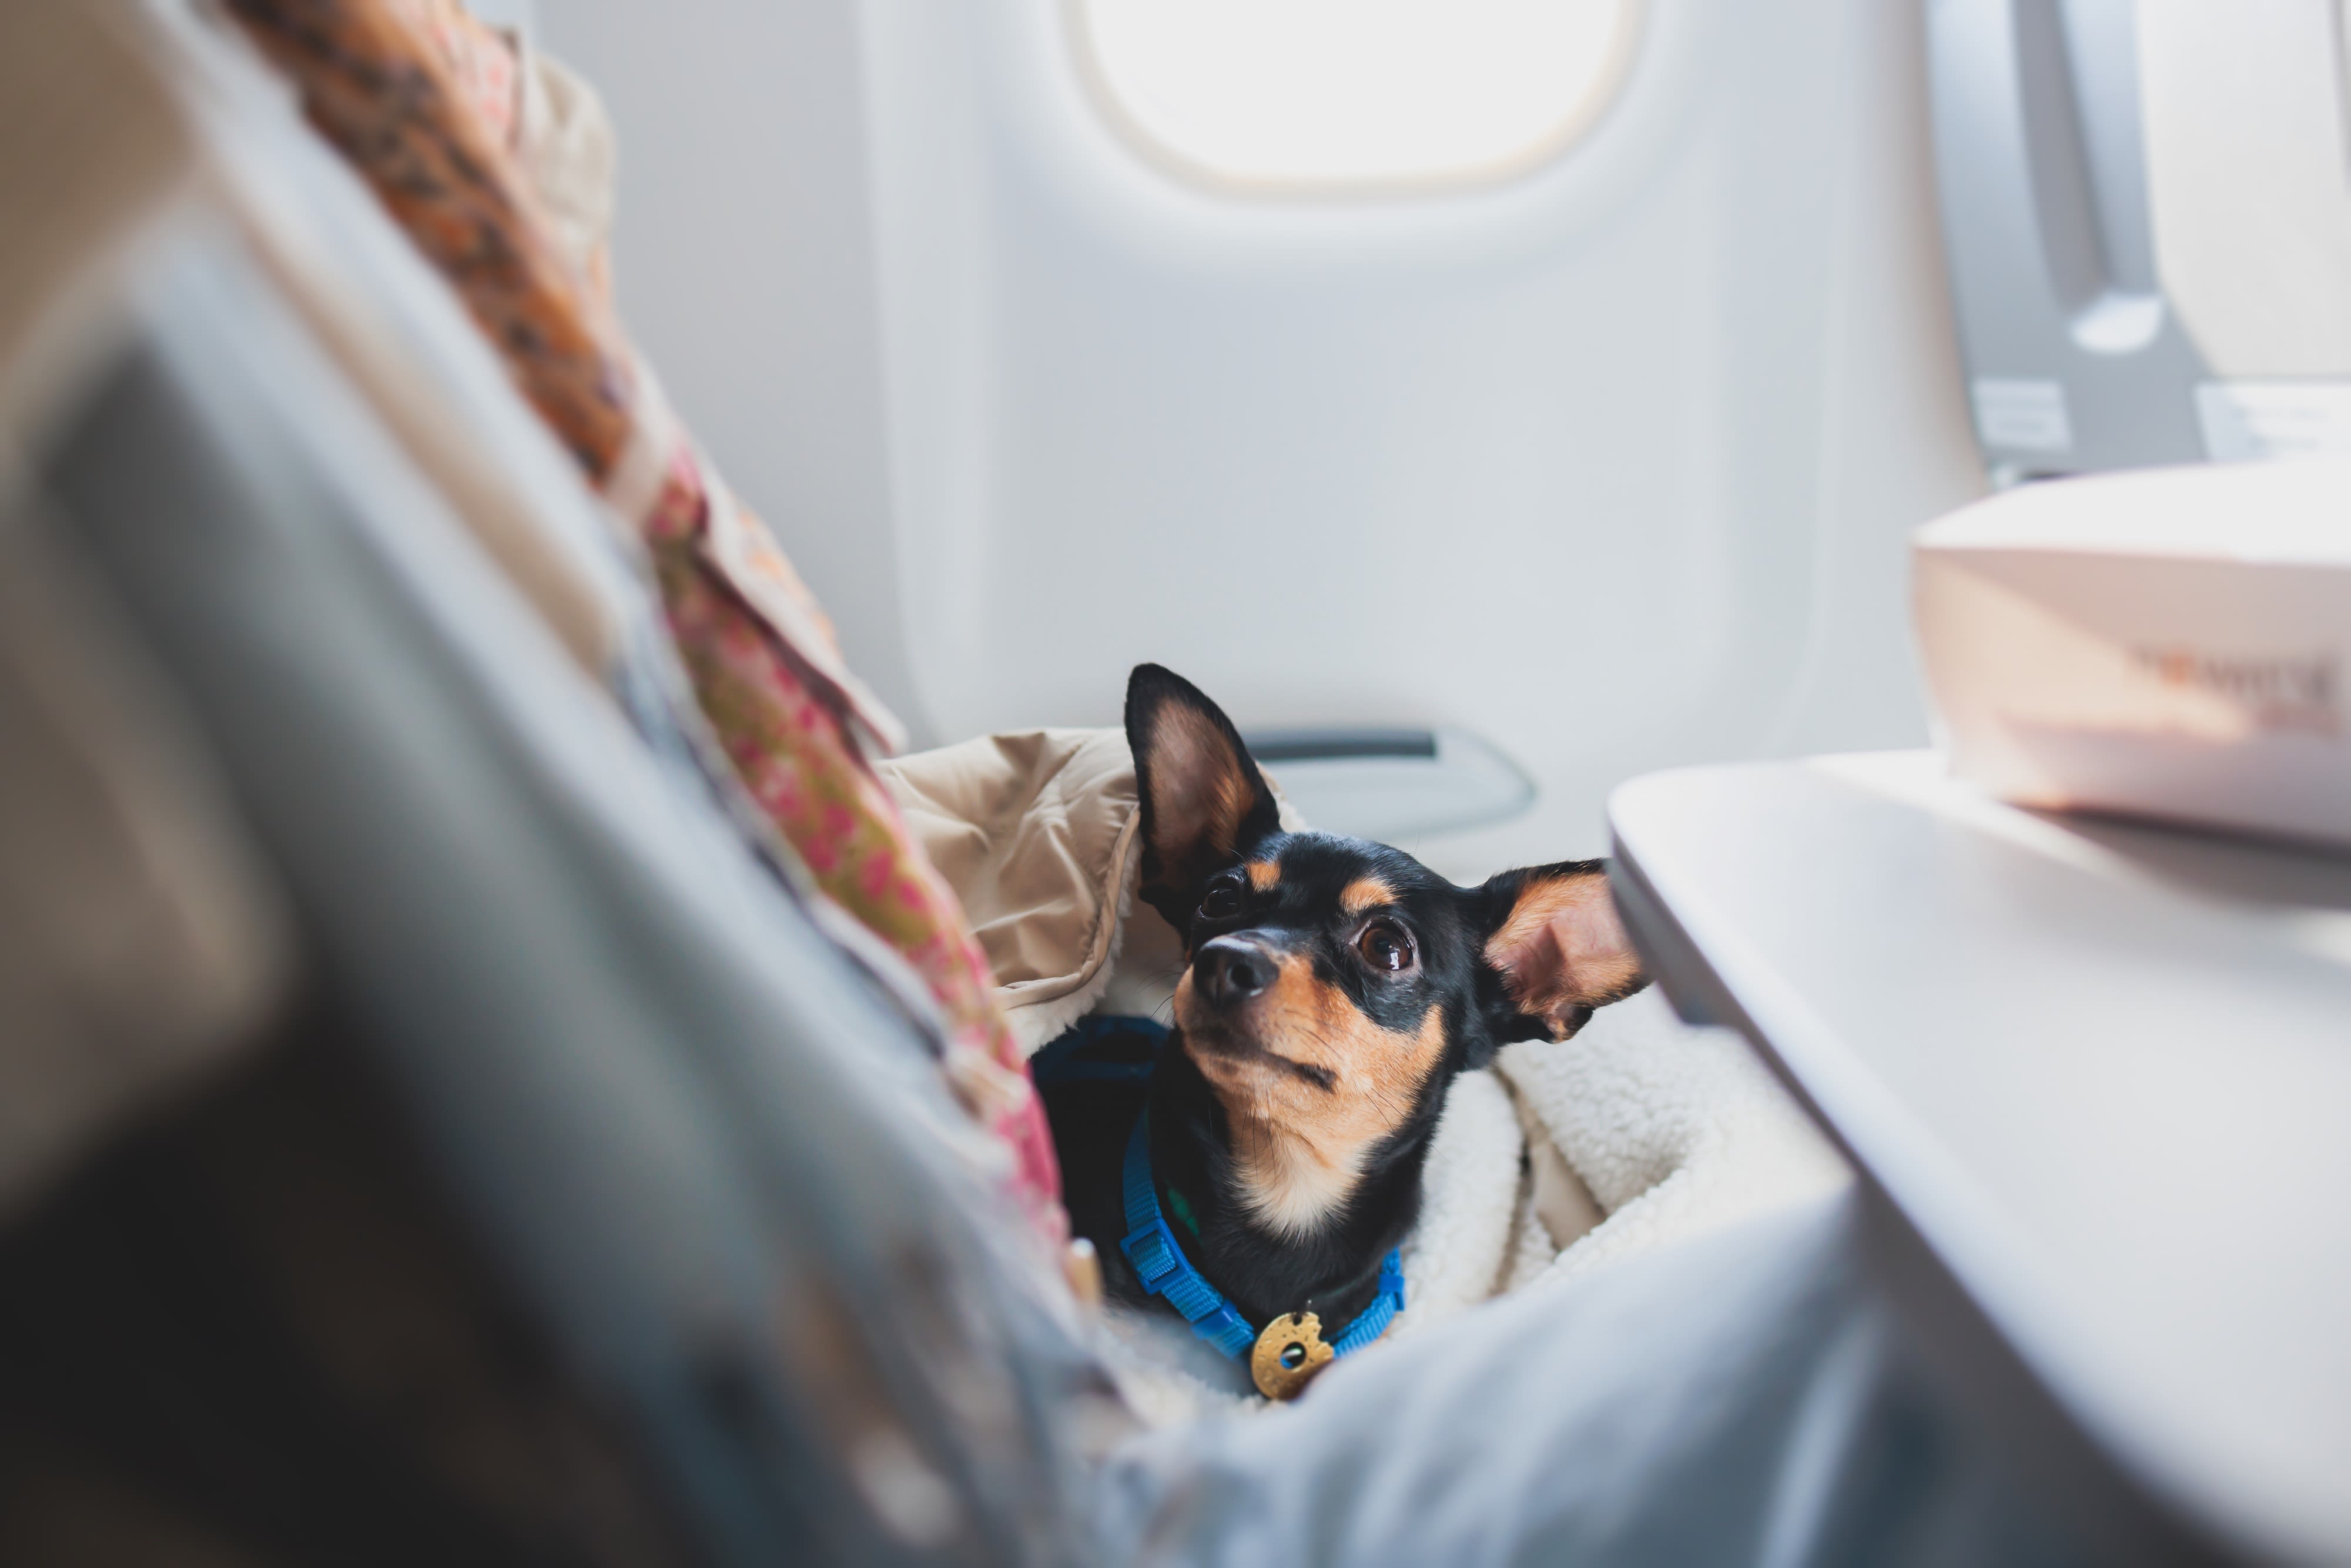 How to protect your pet during an in-flight emergency